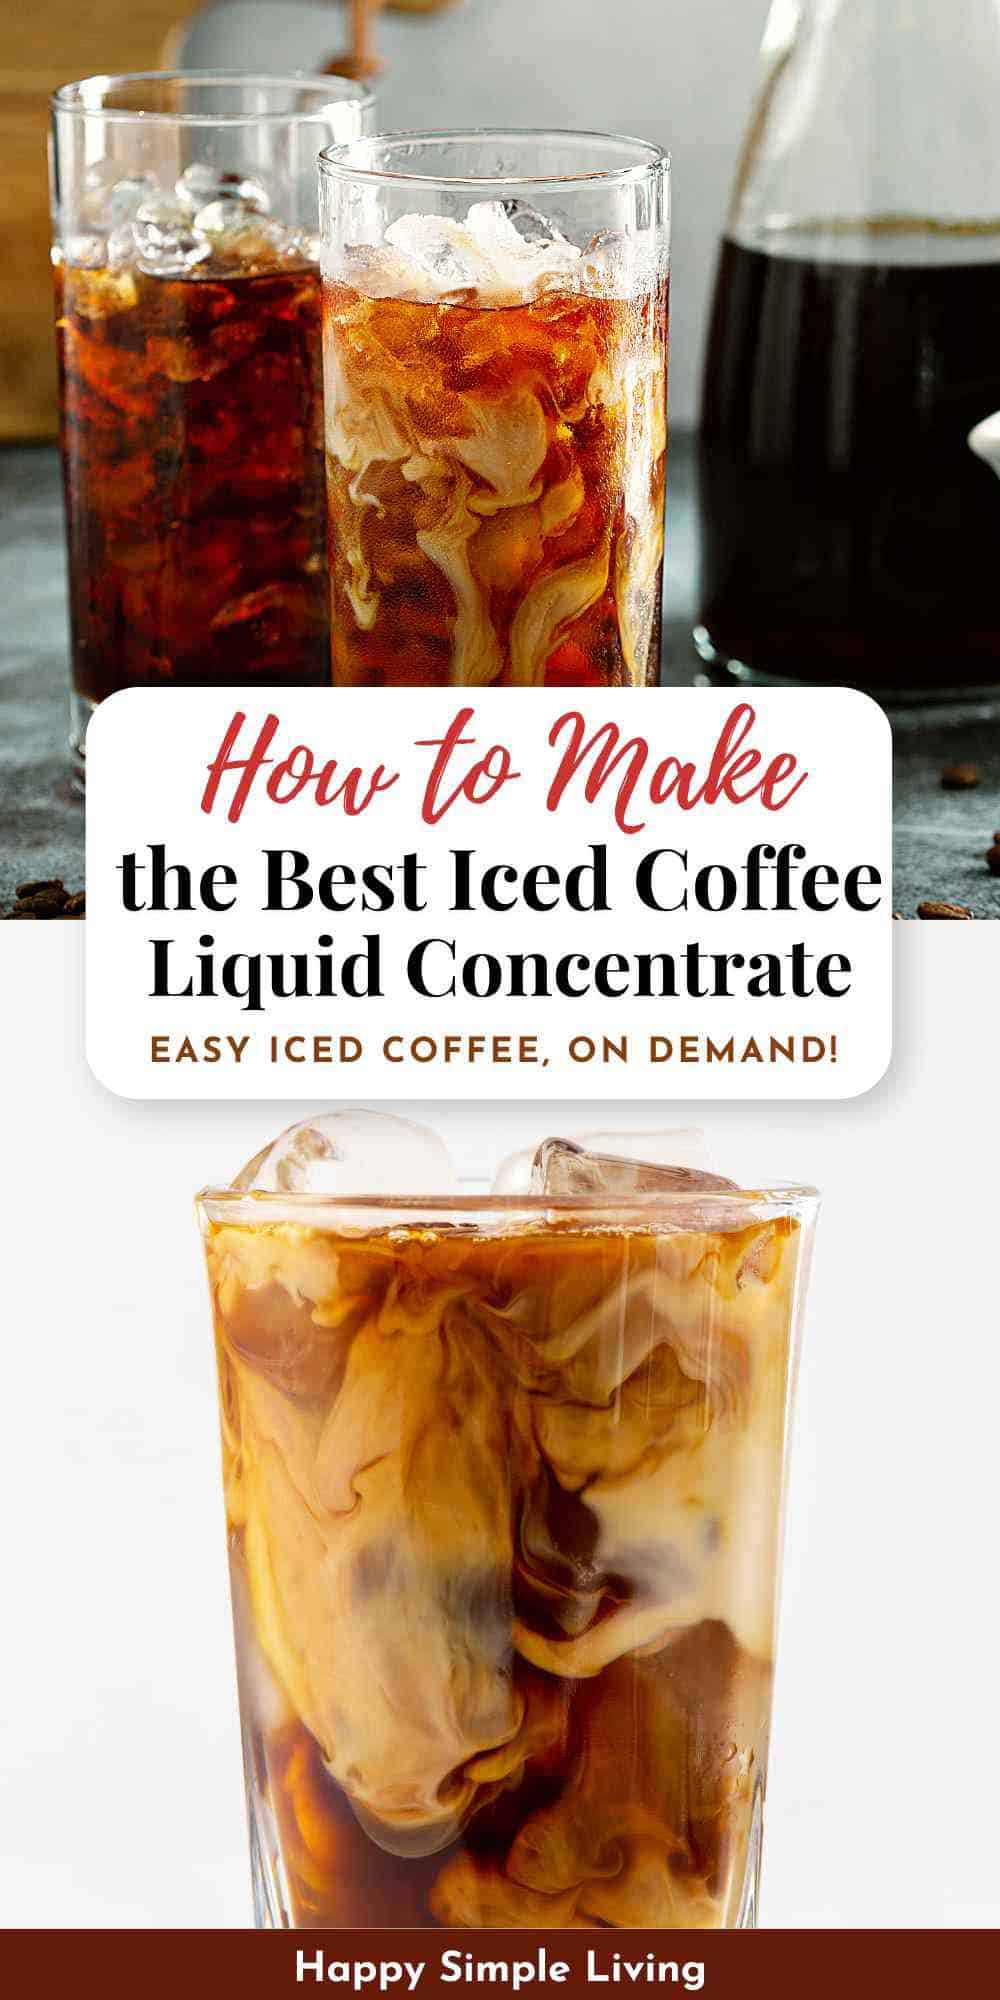 A bottle of iced coffee concentrate and three iced coffee drinks in glasses.